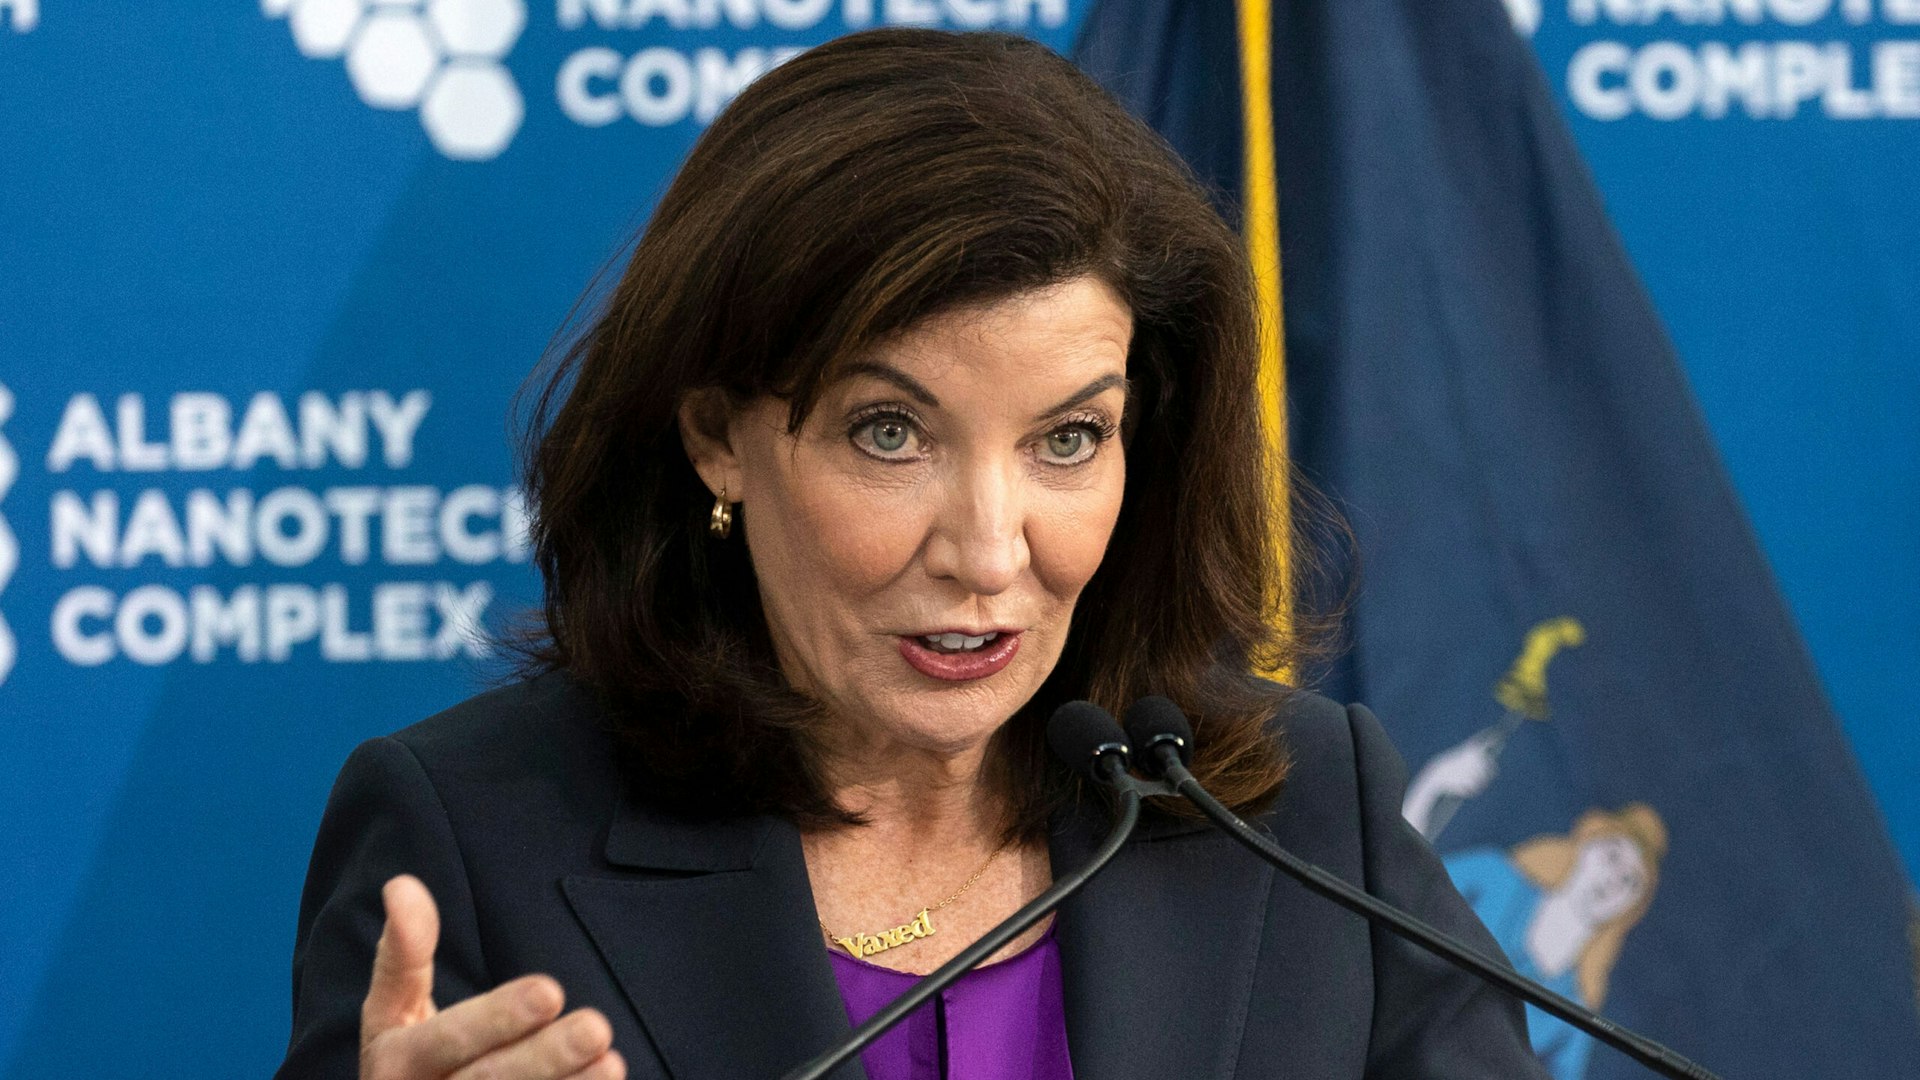 Kathy Hochul, governor of New York, speaks during a new conference at the Albany NanoTech Complex in Albany, New York, U.S., on Monday, Jan. 24, 2022. Hochul said the push for Albany to become the epicenter of semiconductor research and production falls in line with her plan to make the state the most business and worker-friendly state nationwide.